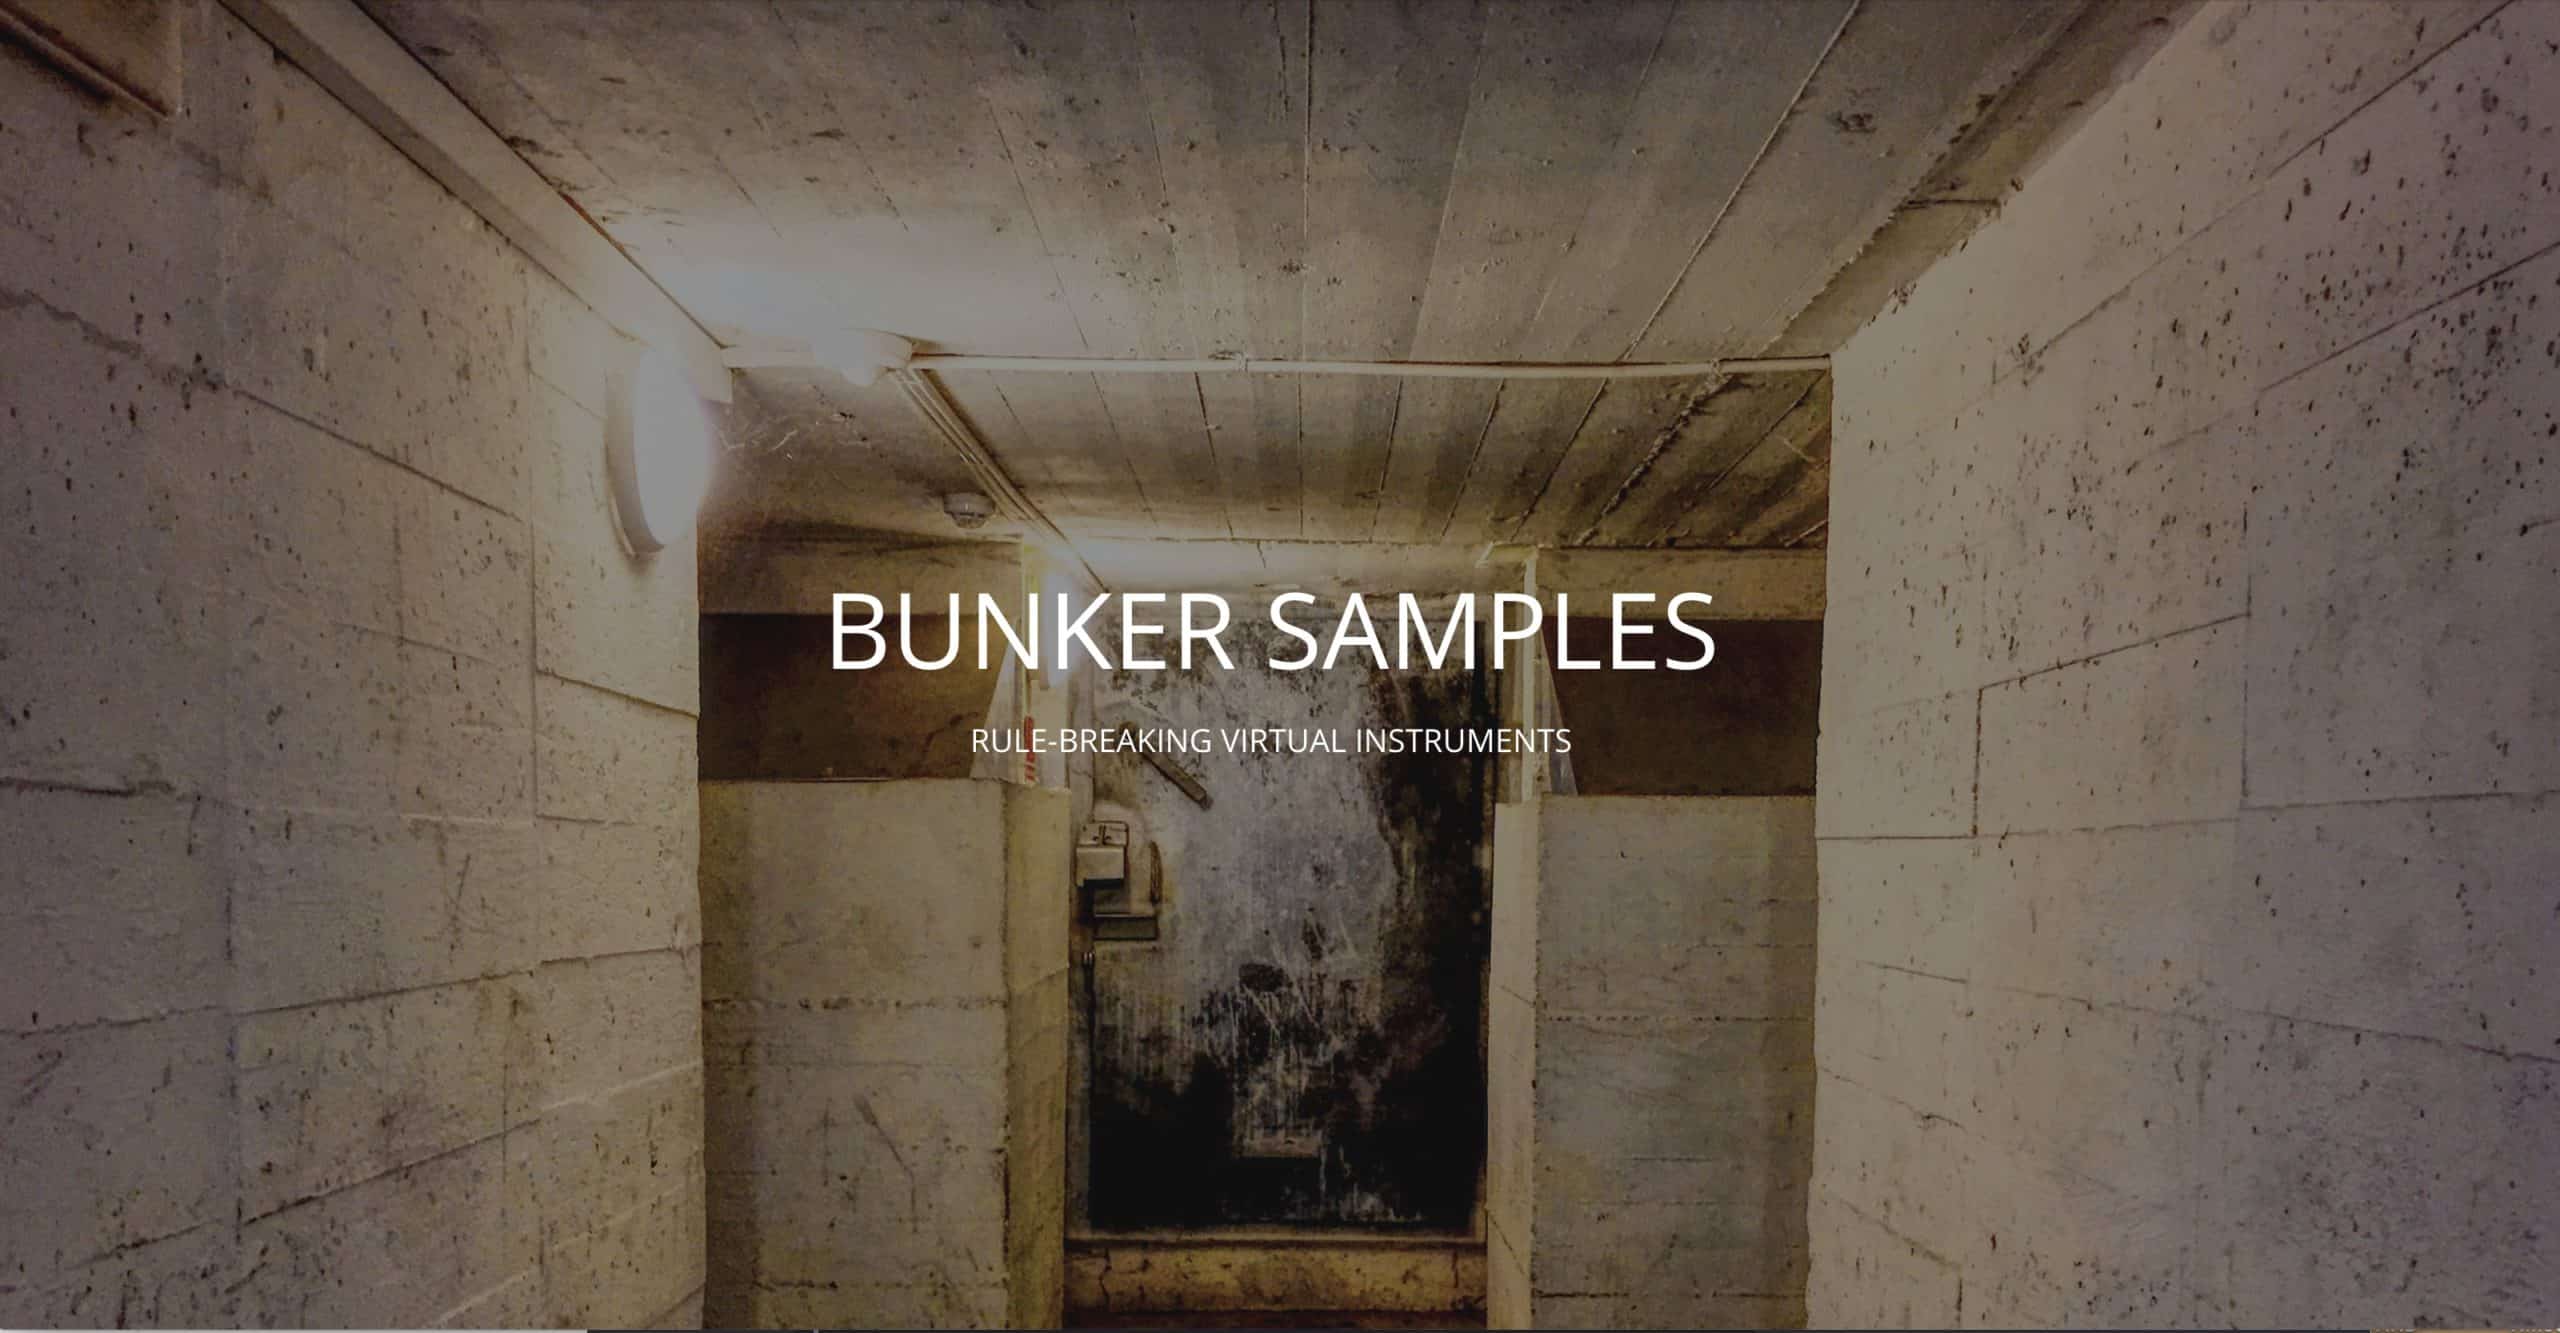 Bunker Samples launches Big Time-Limited Price Reduction